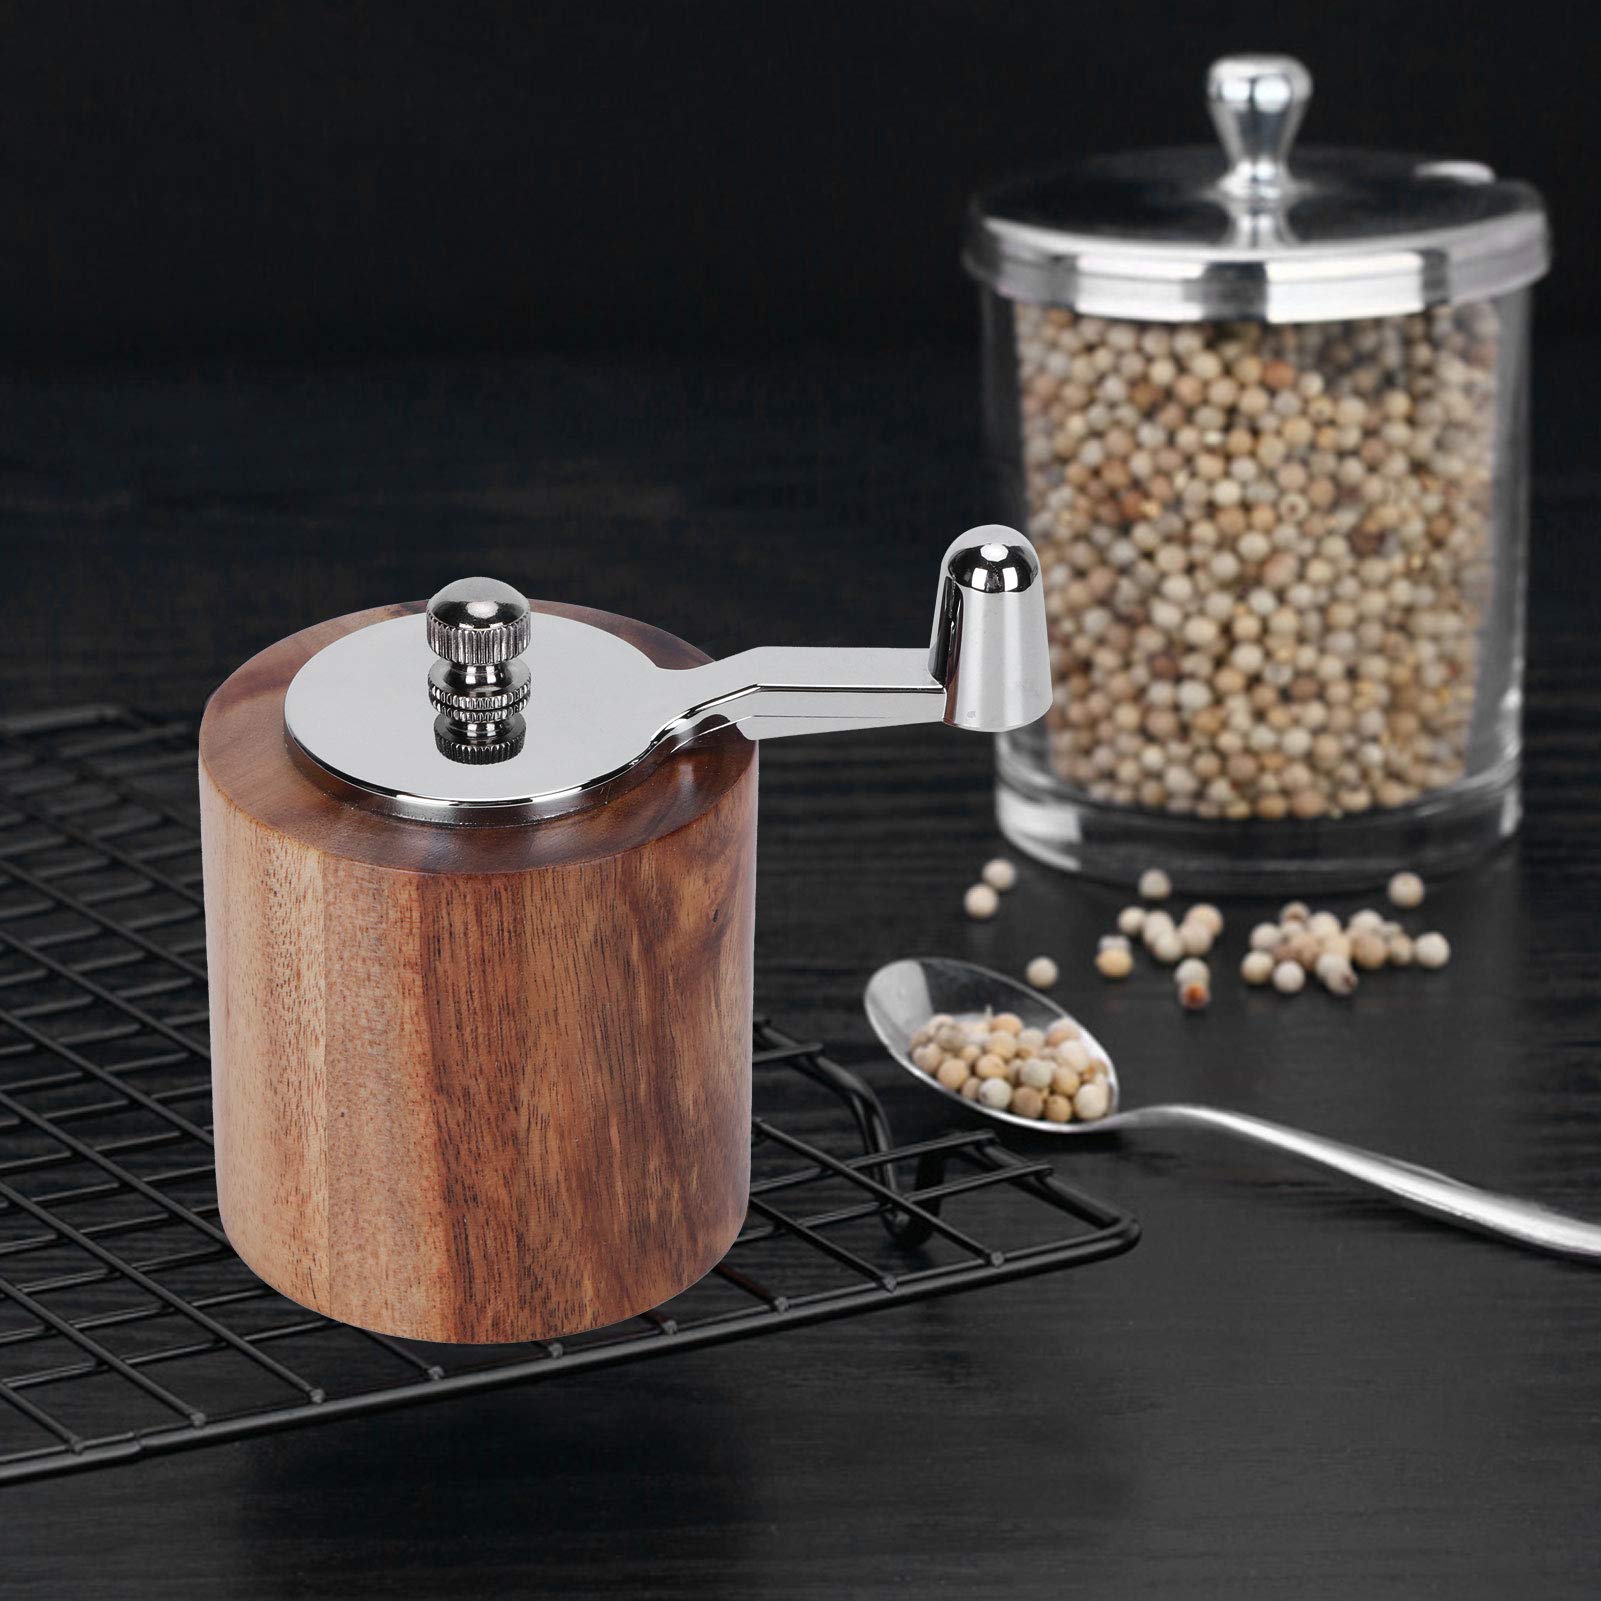 Pepper Grinder, Salt and Pepper Mill Salt Pepper Shakers Grinding Tool Manual Mill with Stainless steel Handle Spice Grinder with Hand Crank for Home Kitchen Restaurant